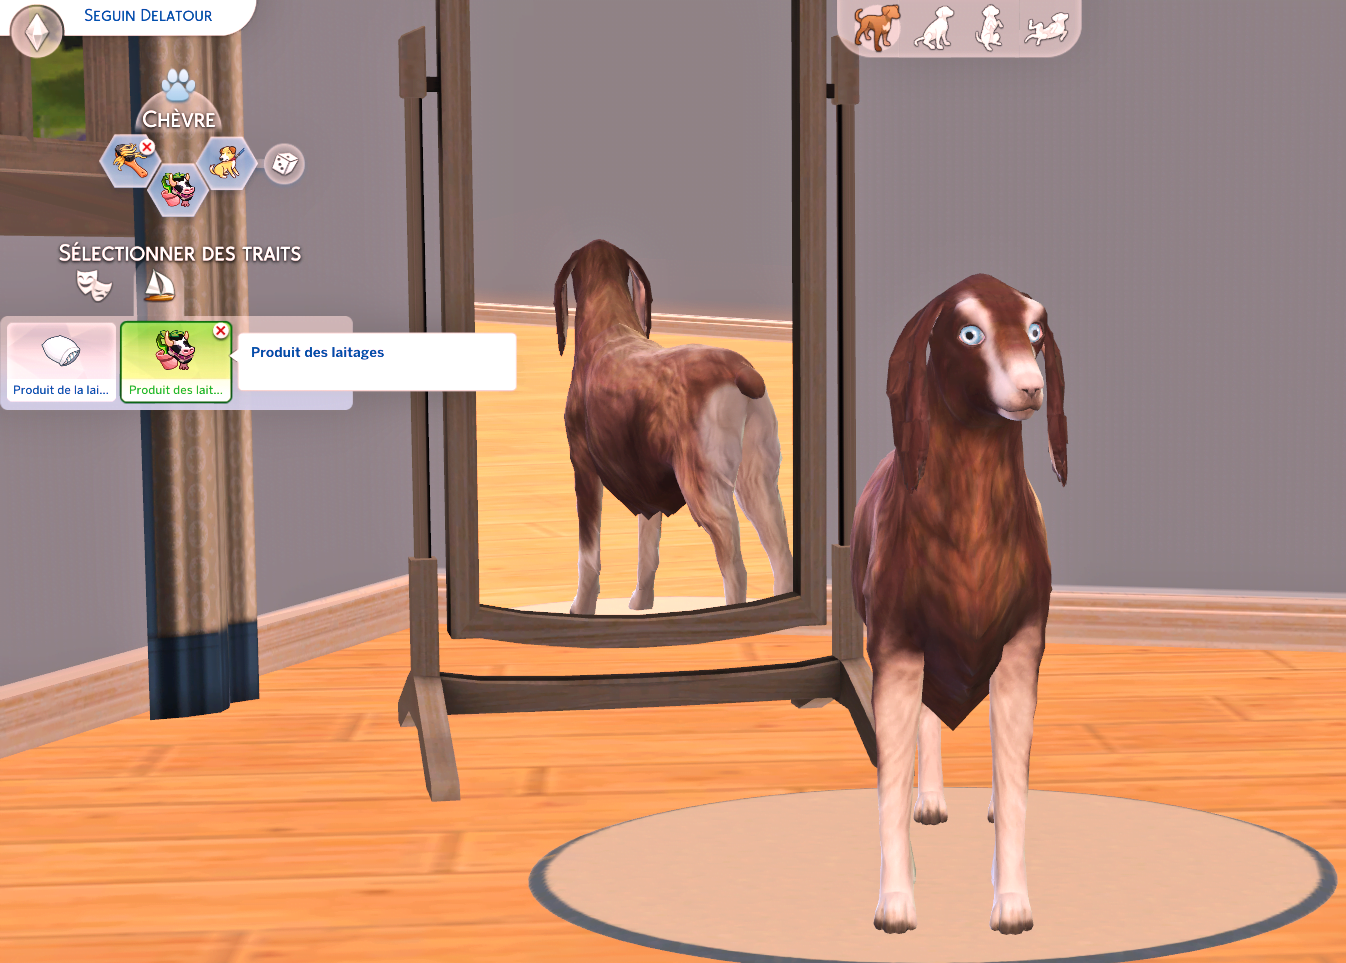 goat sims 4 mods download